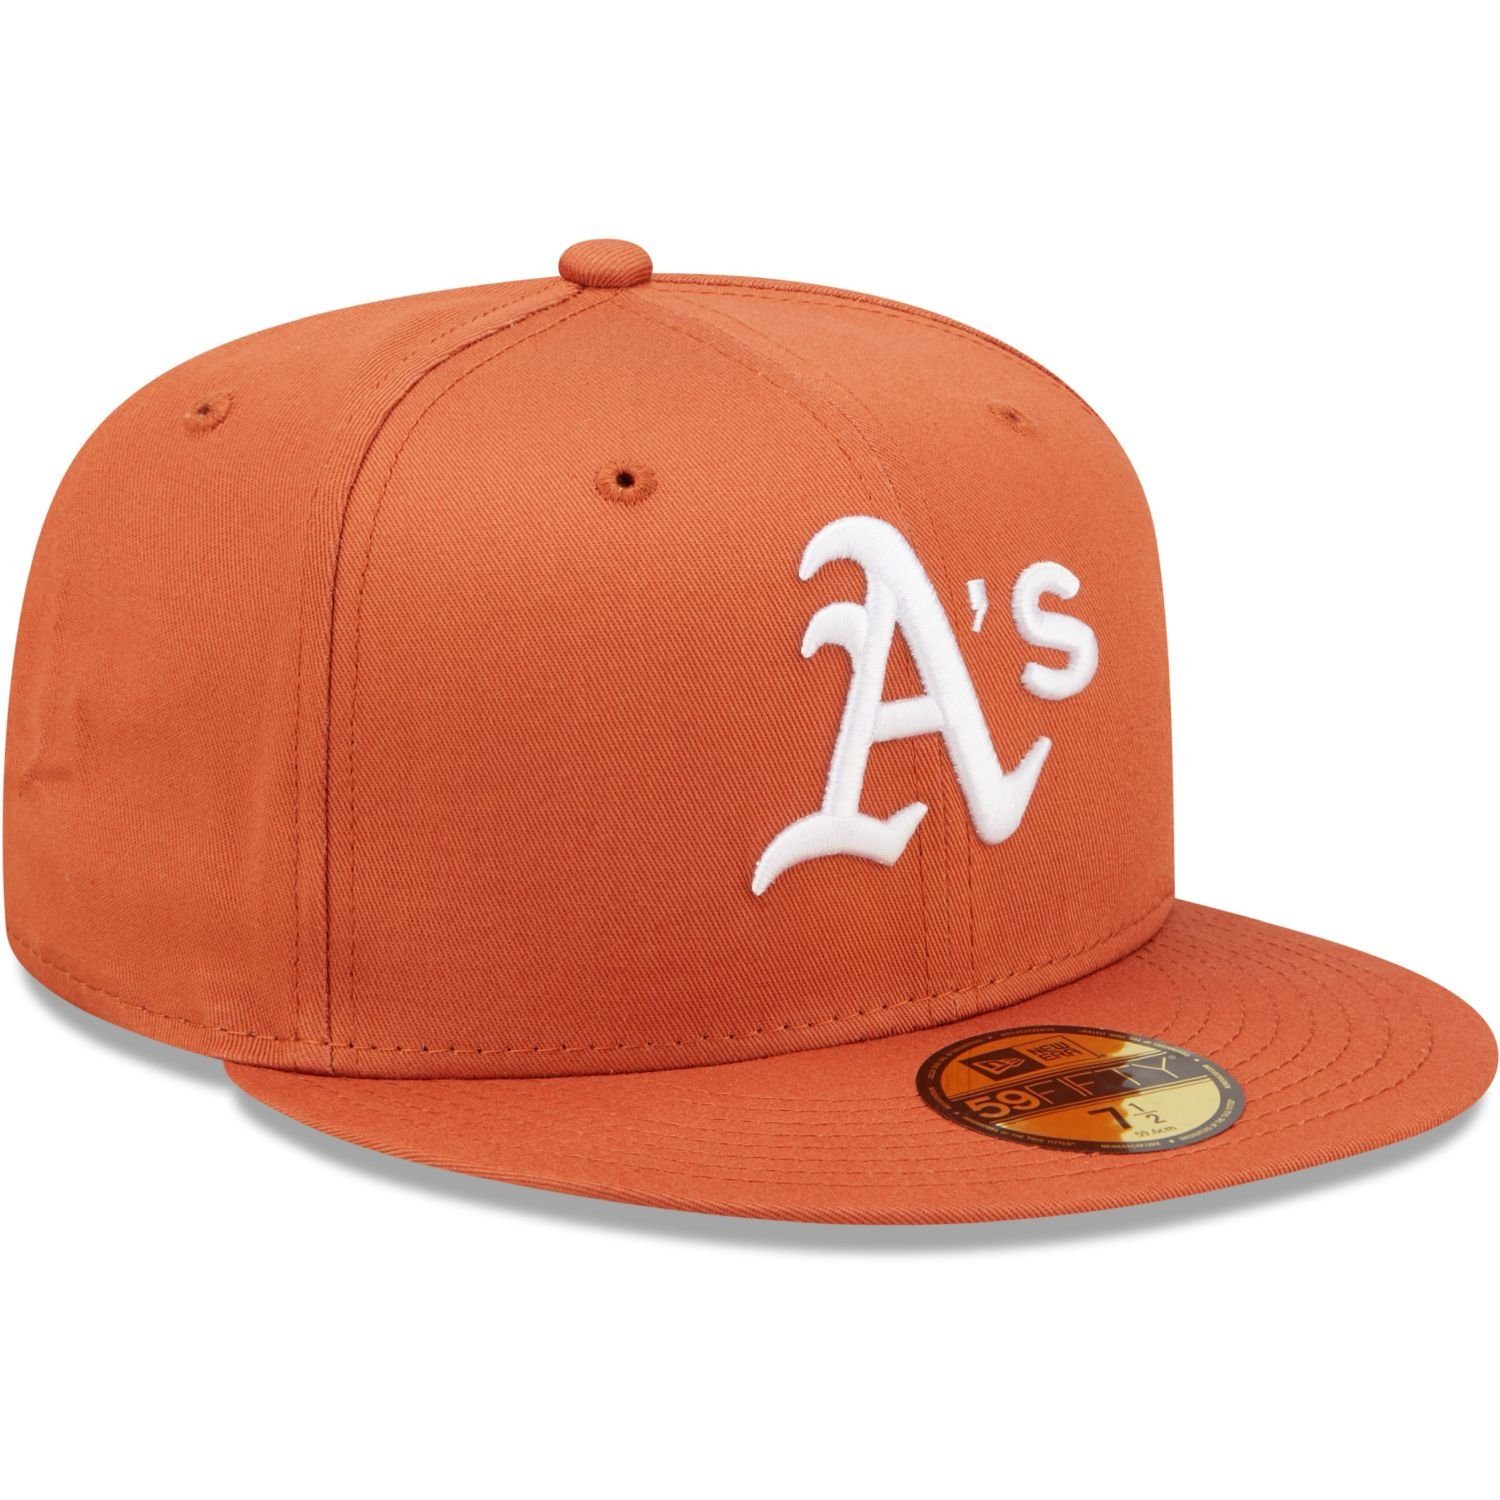 Oakland New Athletics 59Fifty Era Fitted Cap